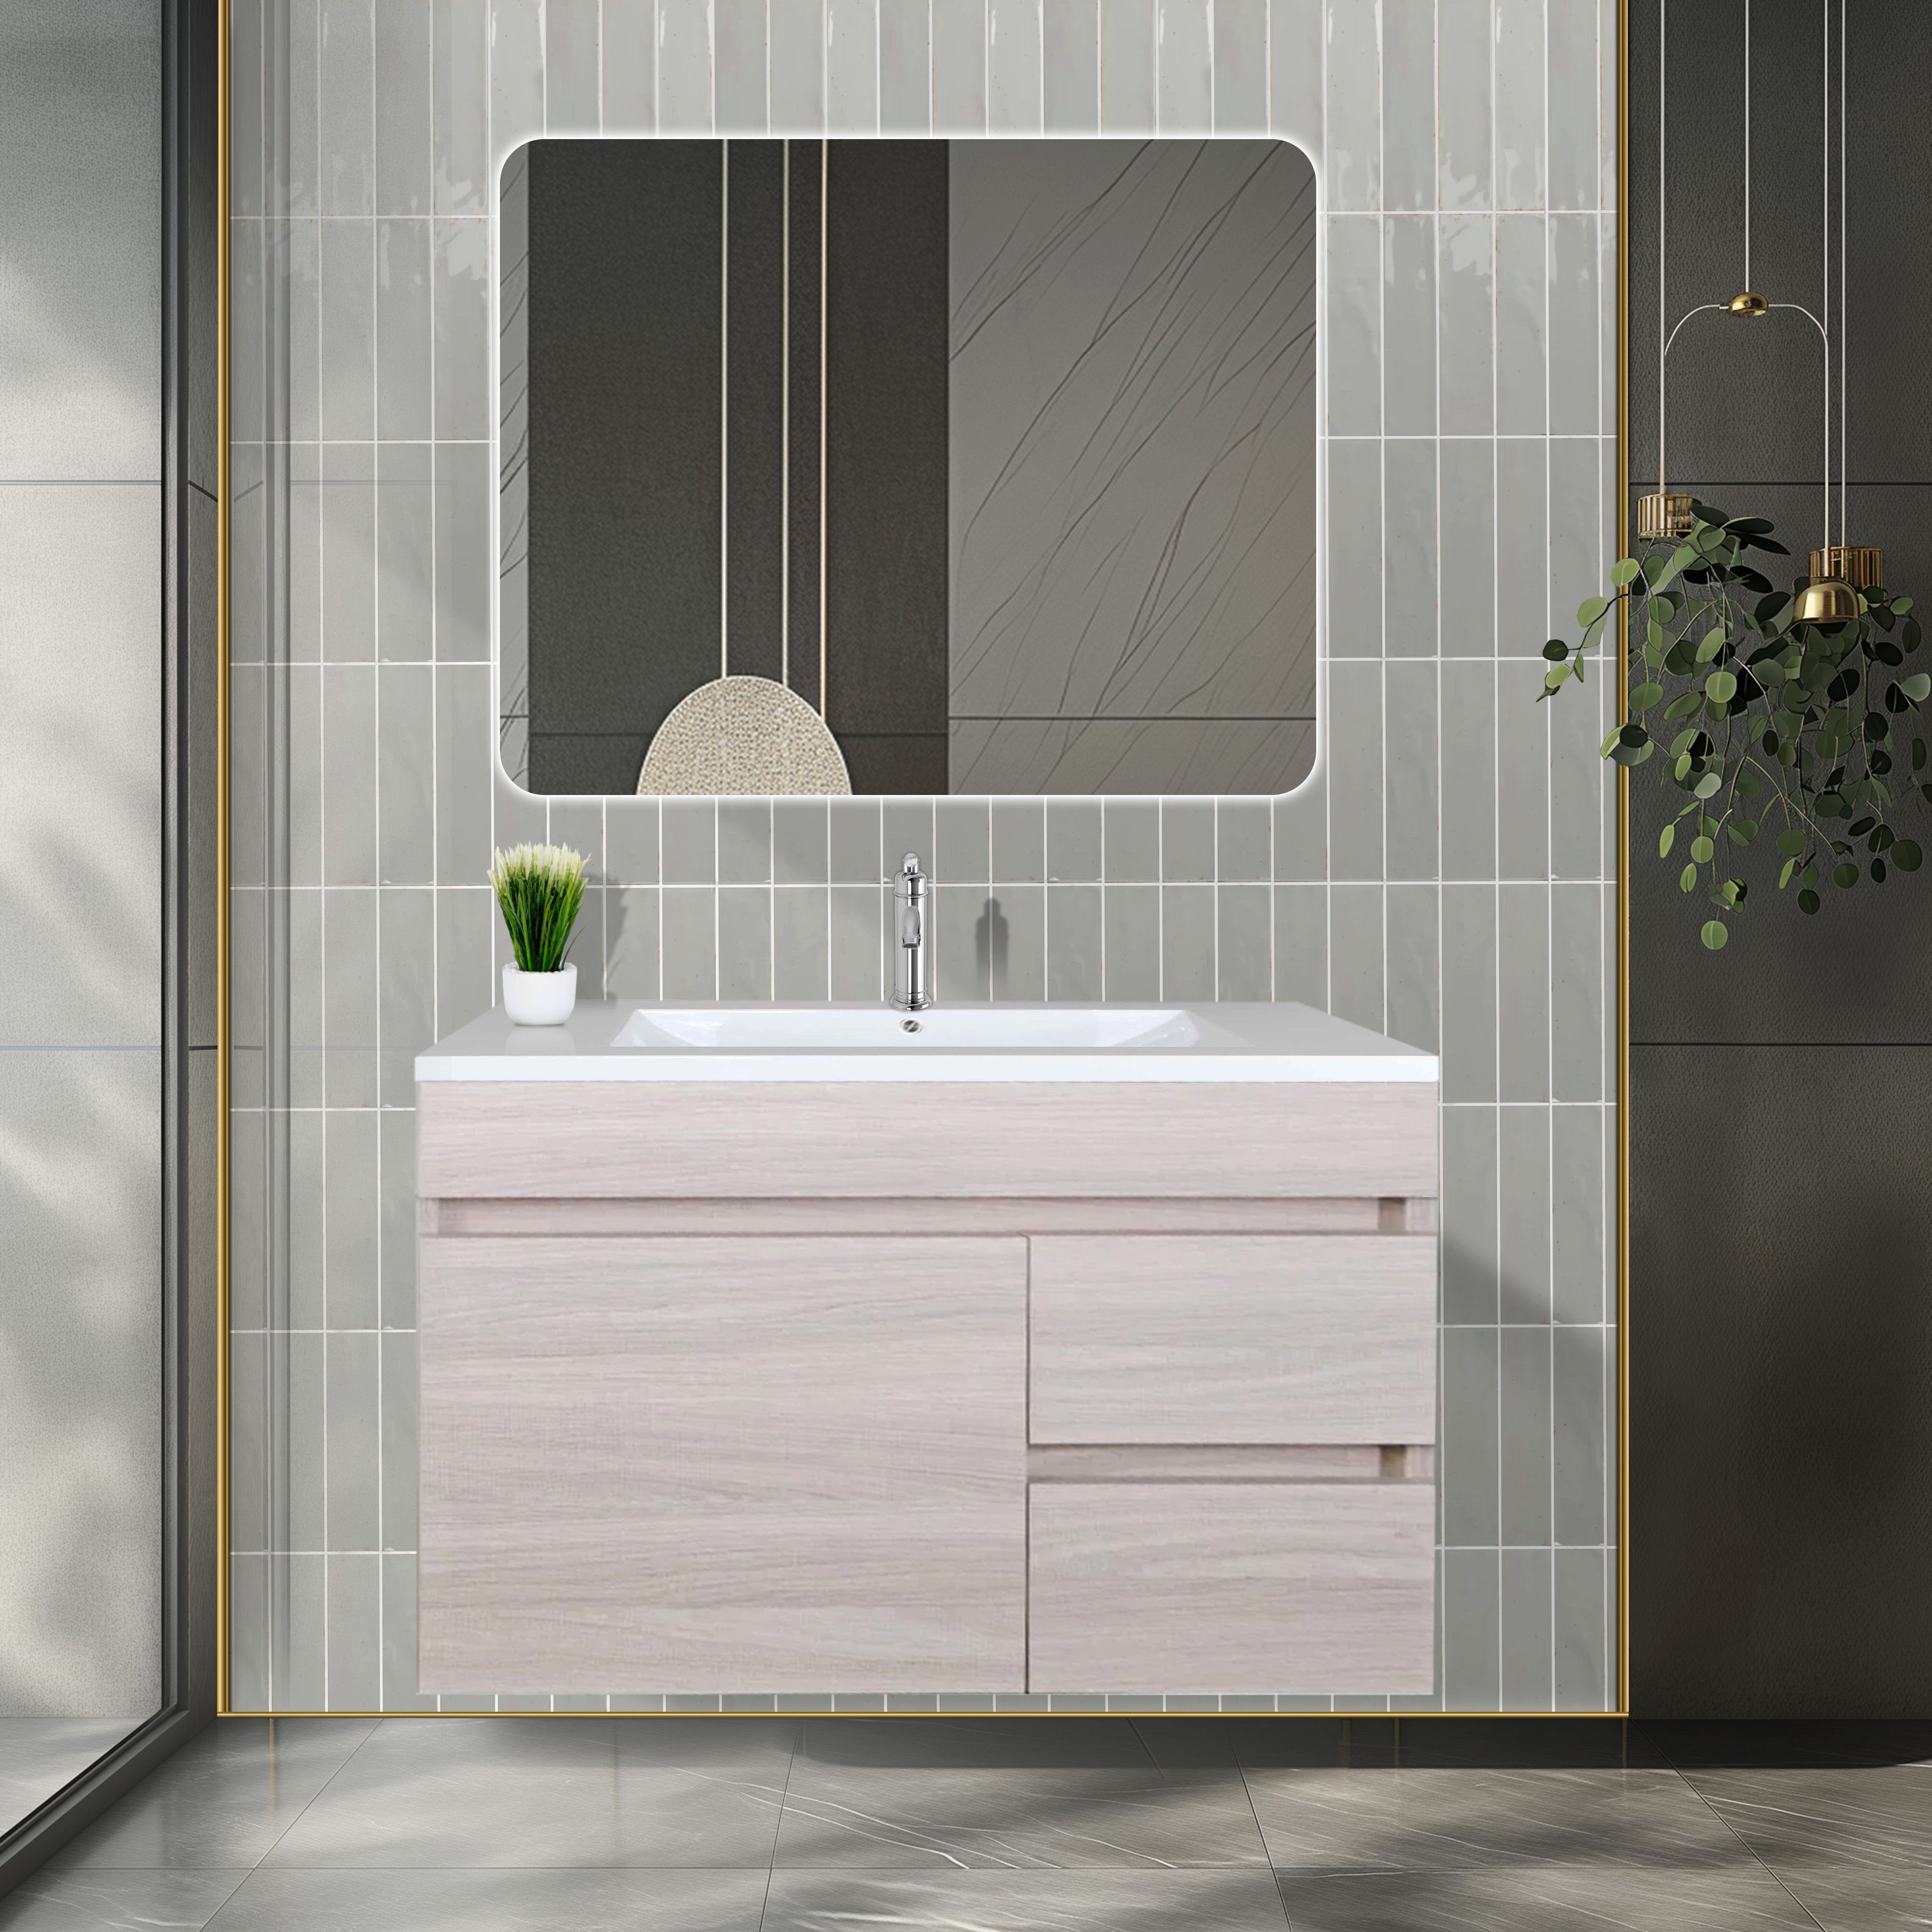 POSEIDON EVIE OAK 900MM SINGLE BOWL WALL HUNG VANITY(AVAILABLE IN LEFT AND RIGHT HAND DRAWER)